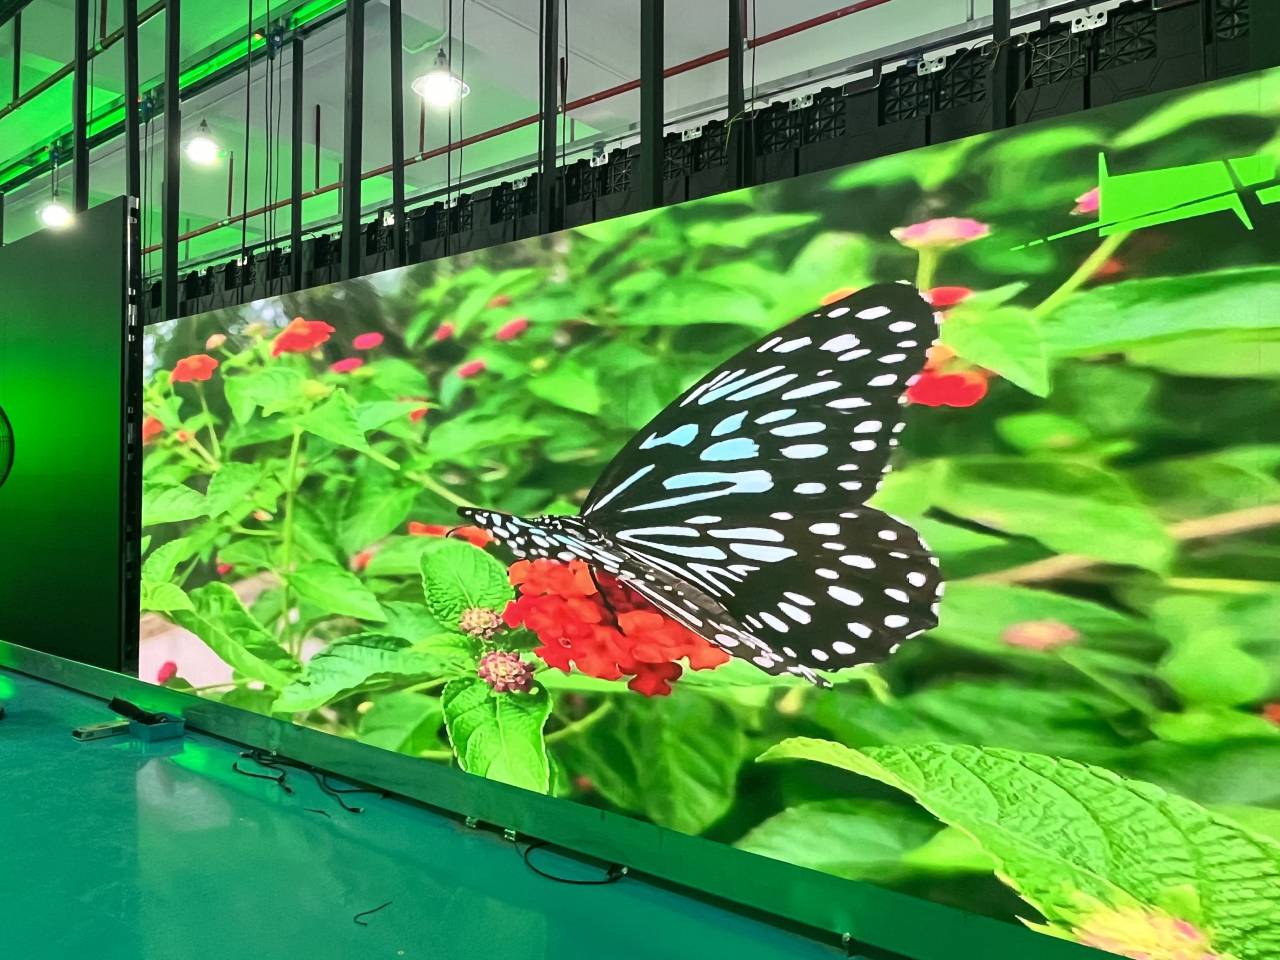 Zero bezel LED video wall showing bright butterfly imagery